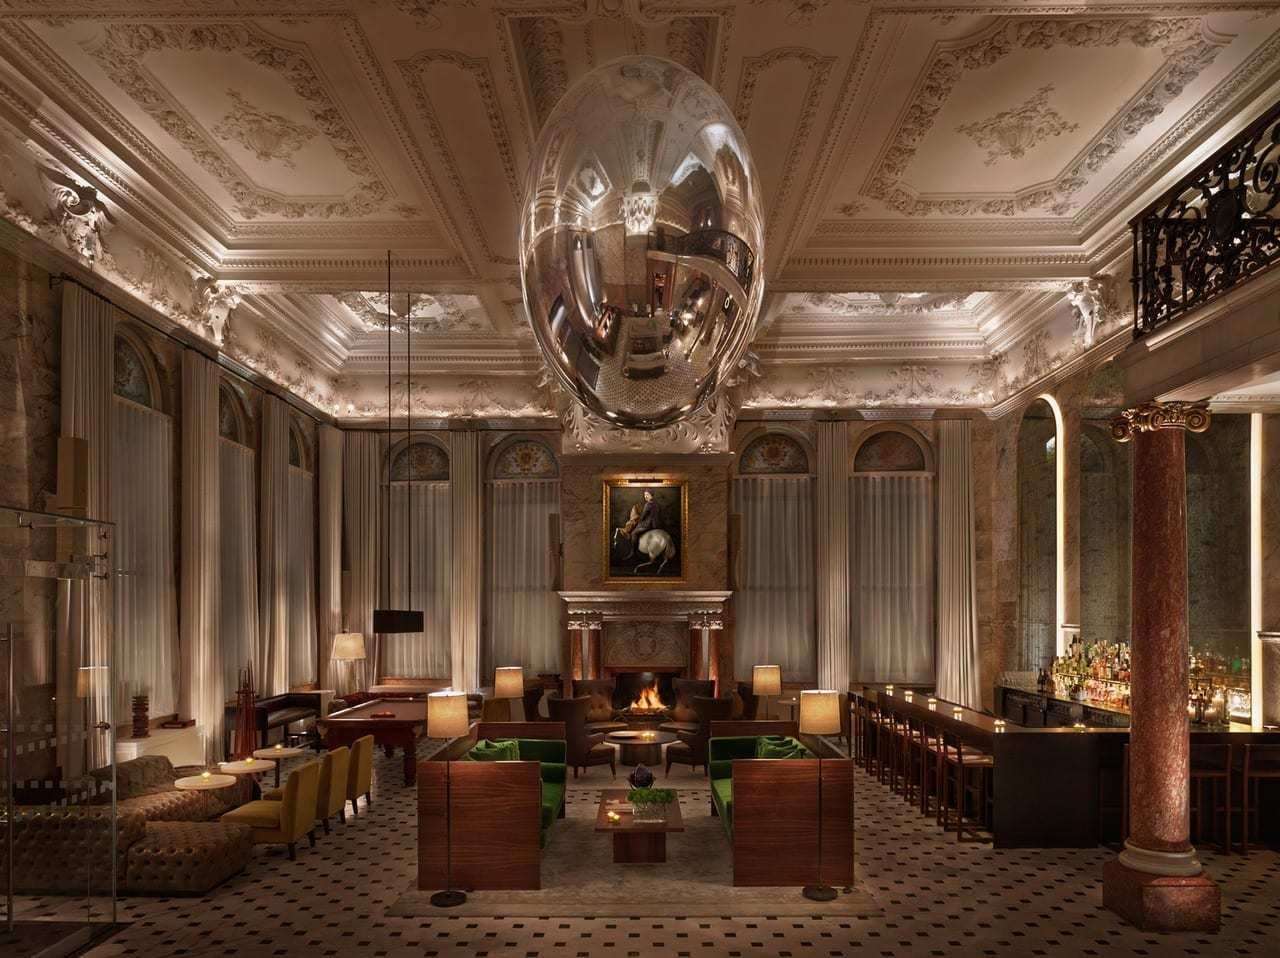 The grand lobby and bar, complete with vintage pool table (14449571)